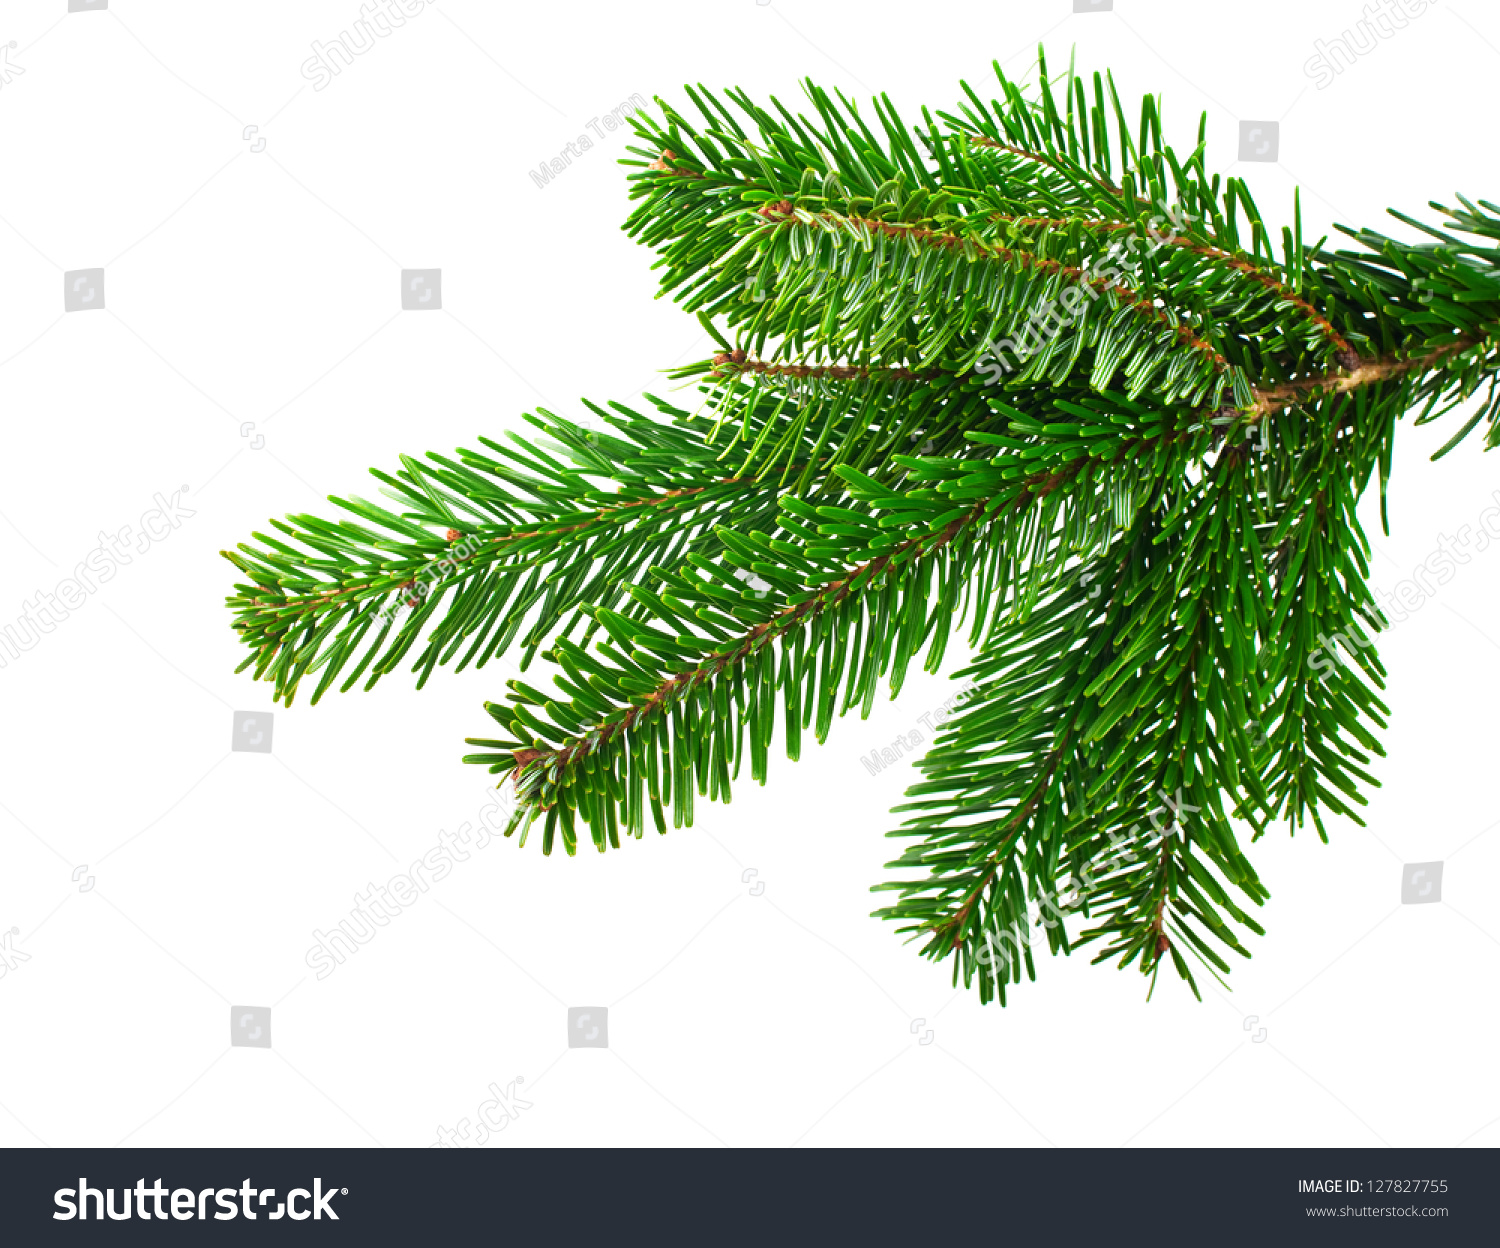 stock-photo-spruce-branch-on-a-white-background-127827755.jpg